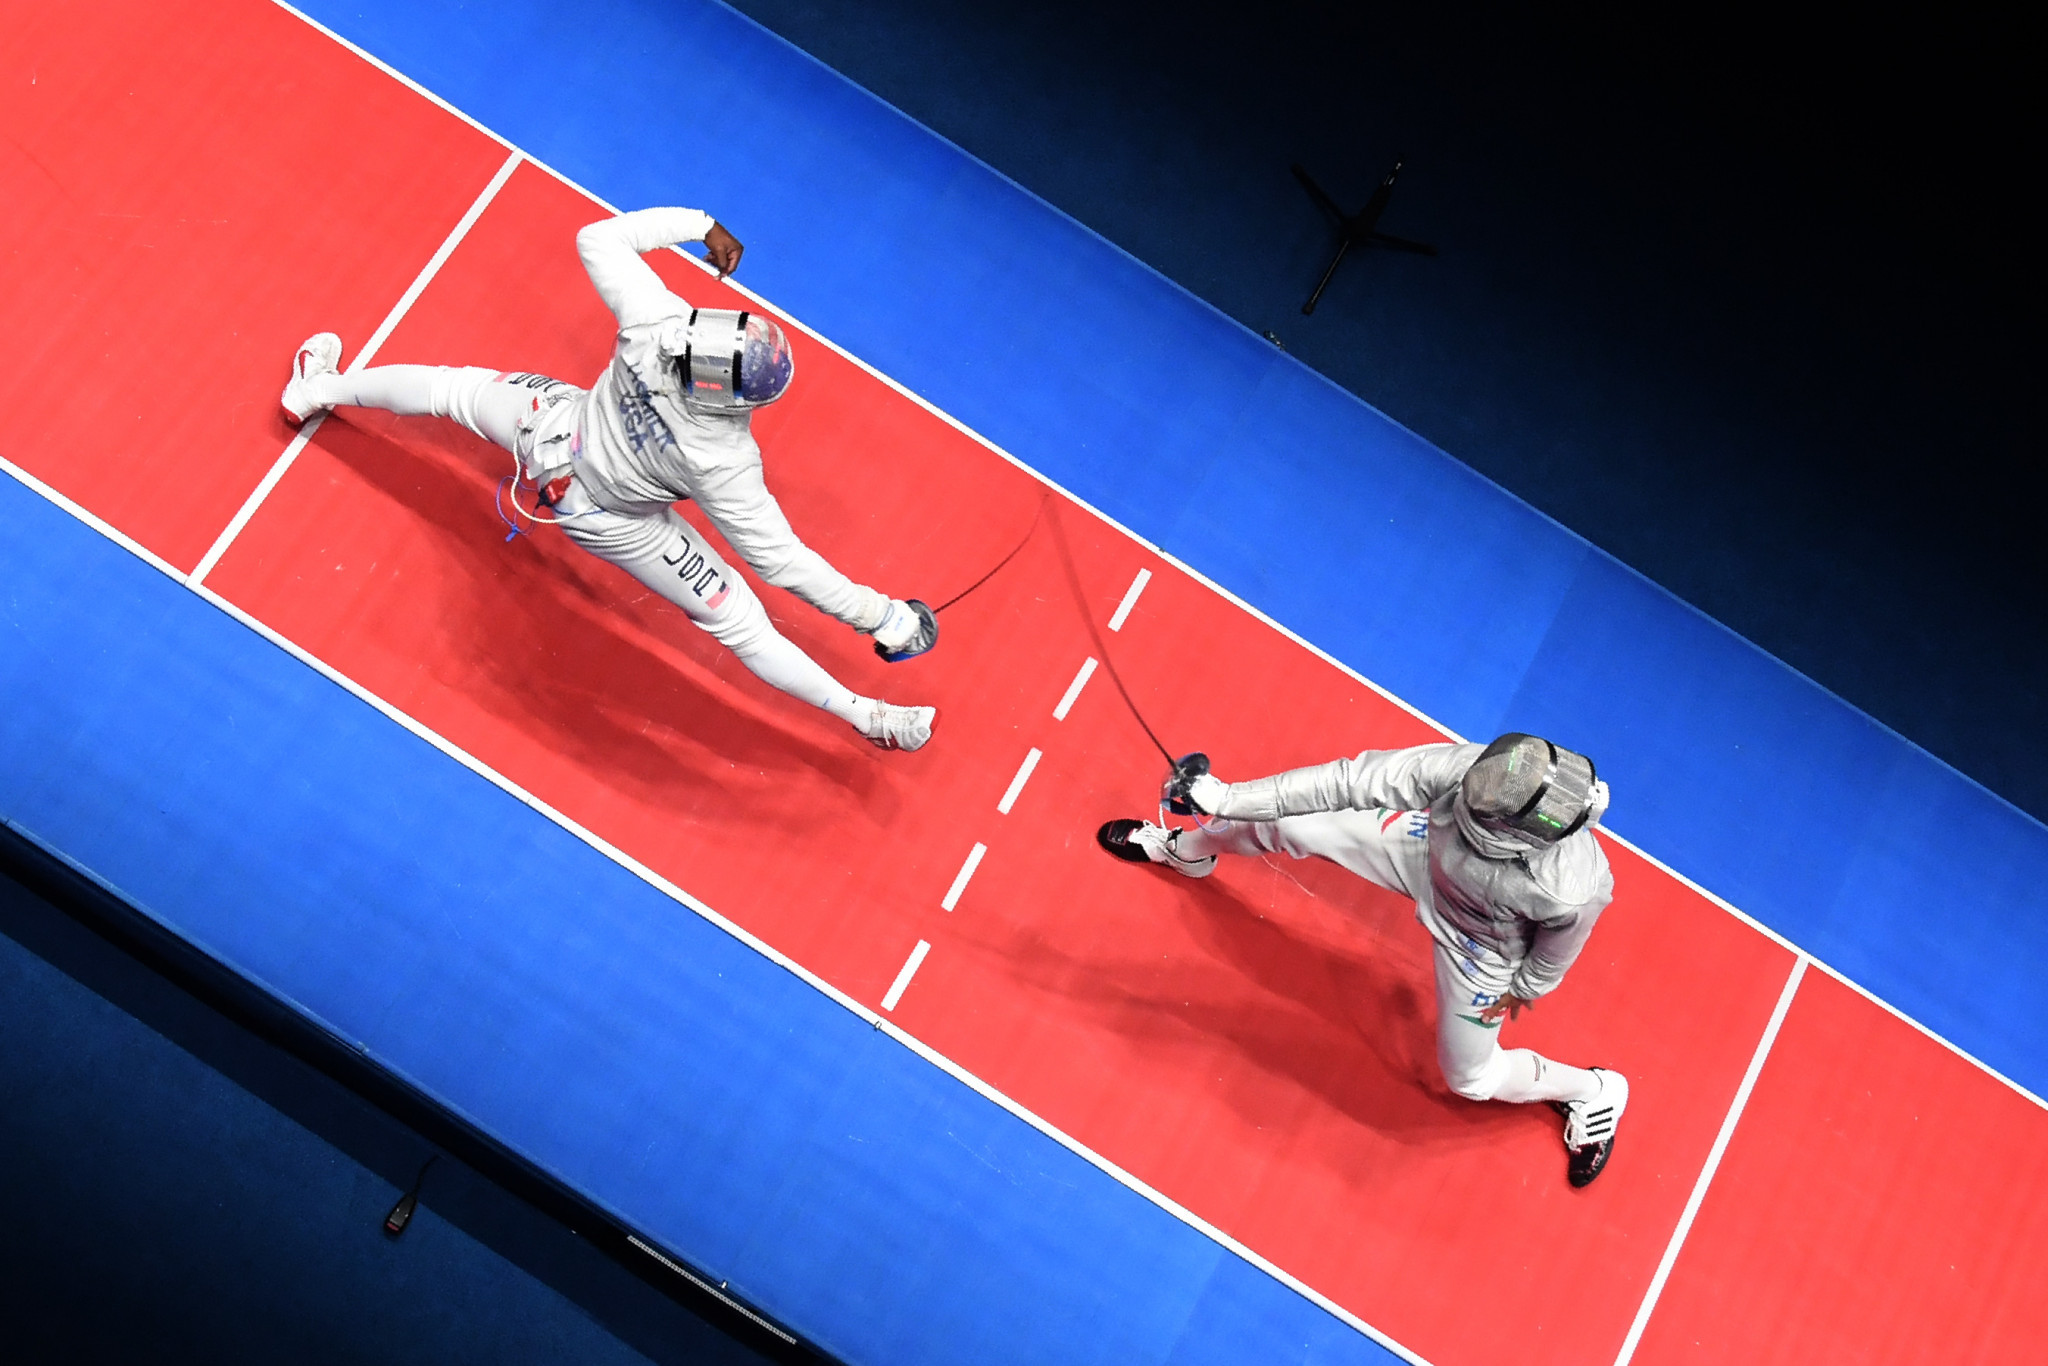 The International Fencing Federation expects to dip heavily into its reserves this year and next, with a draft budget projecting no donations ©Getty Images